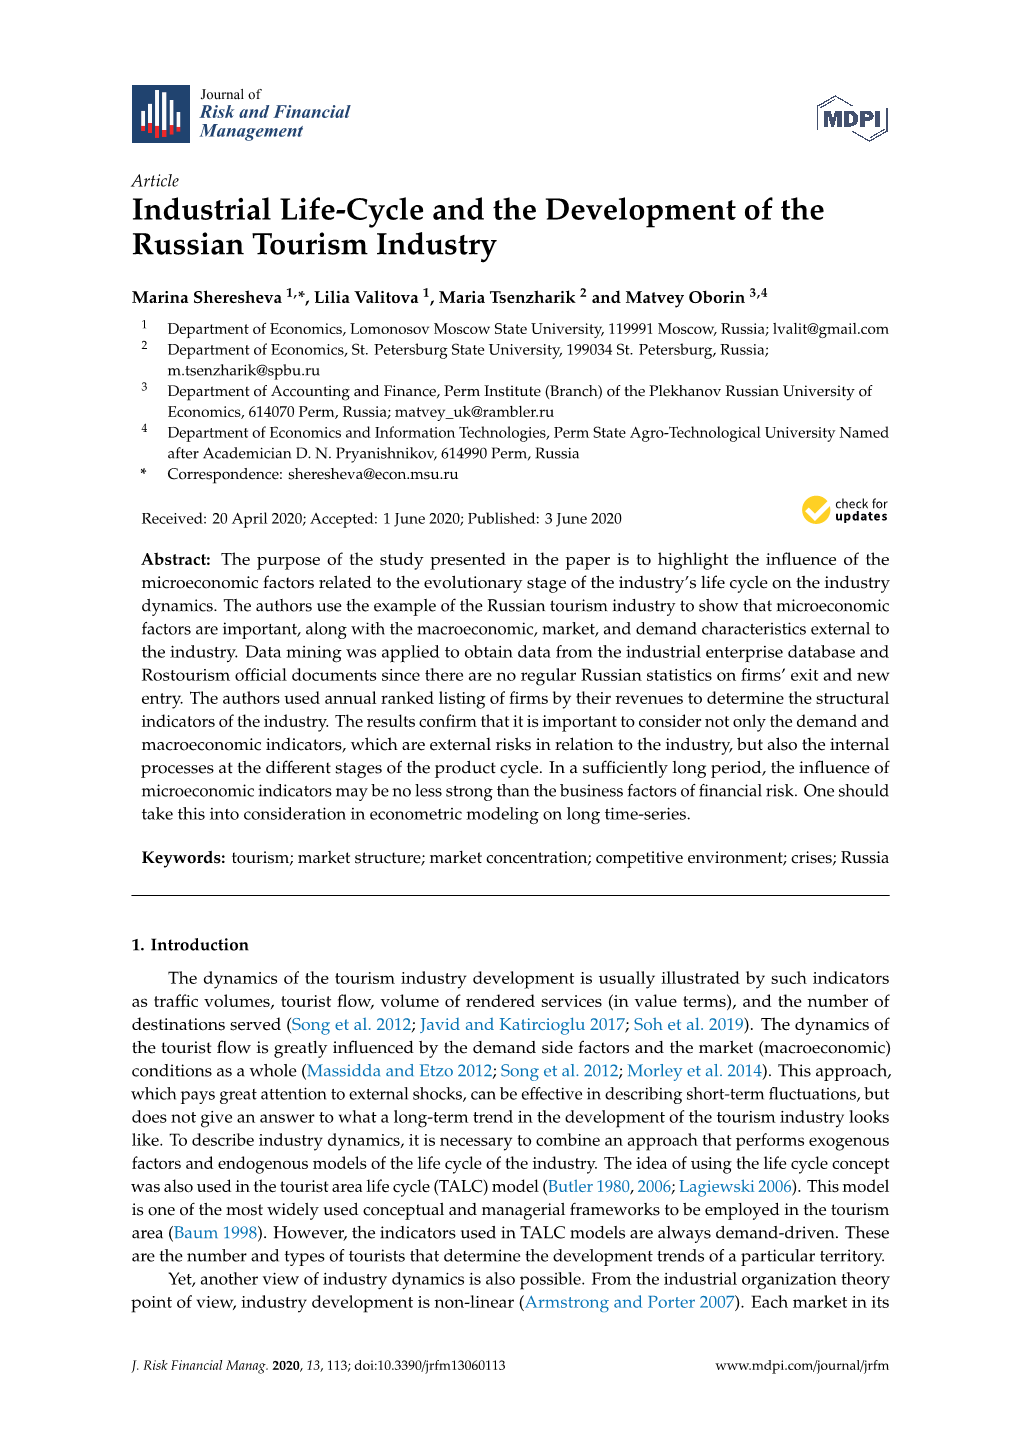 Industrial Life-Cycle and the Development of the Russian Tourism Industry